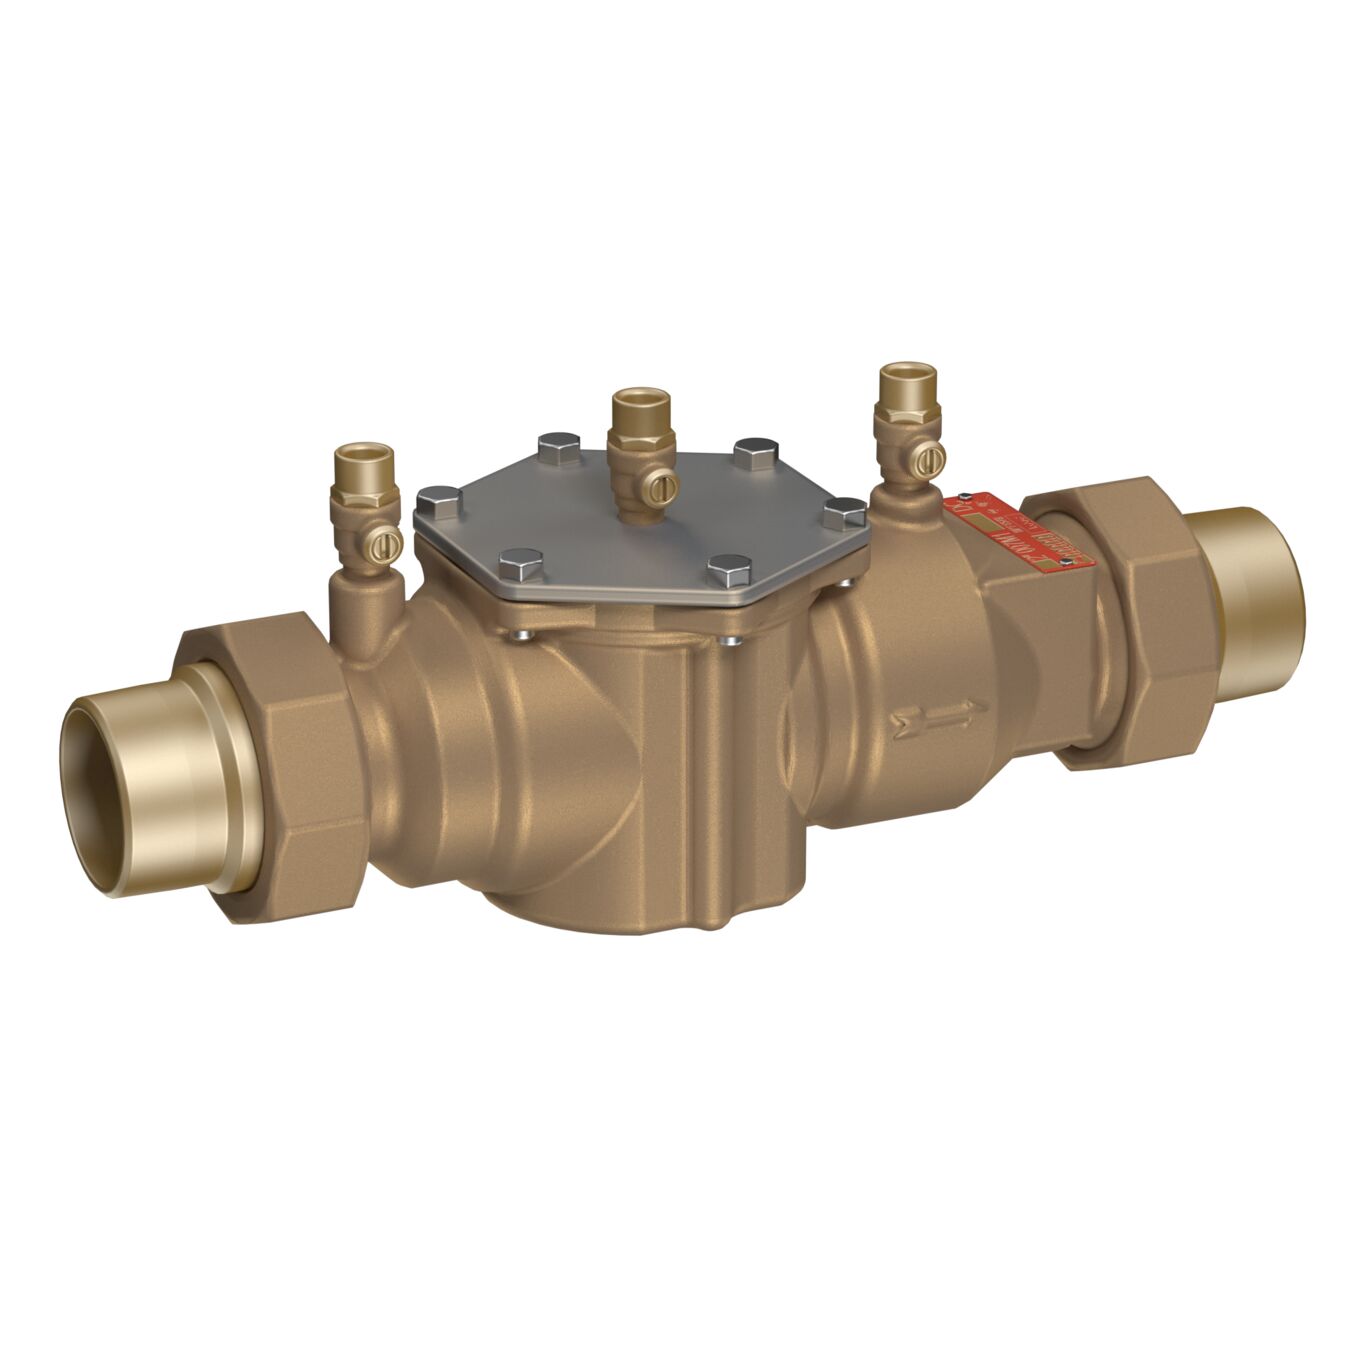 Product Image - Bronze Double Check Valve Assembly Backflow Preventer, Less Shutoff, Ul Classified, Single Top Entry